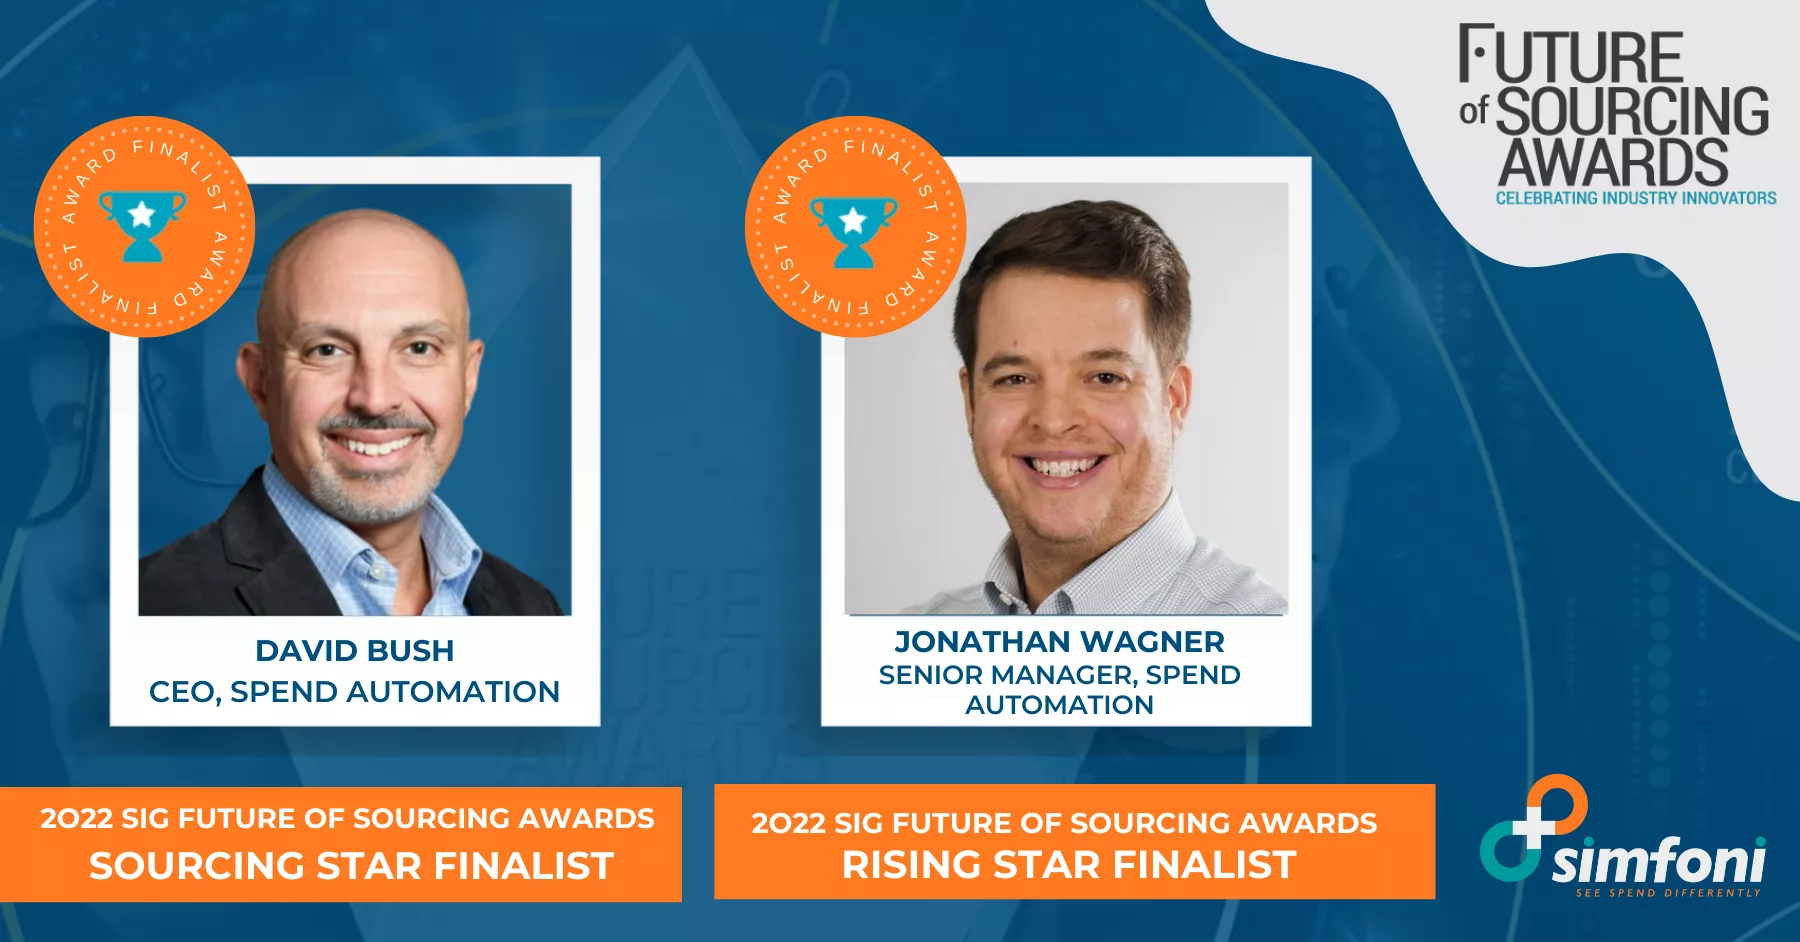 Simfoni Finalists Announced for 2022 Future of Sourcing Awards